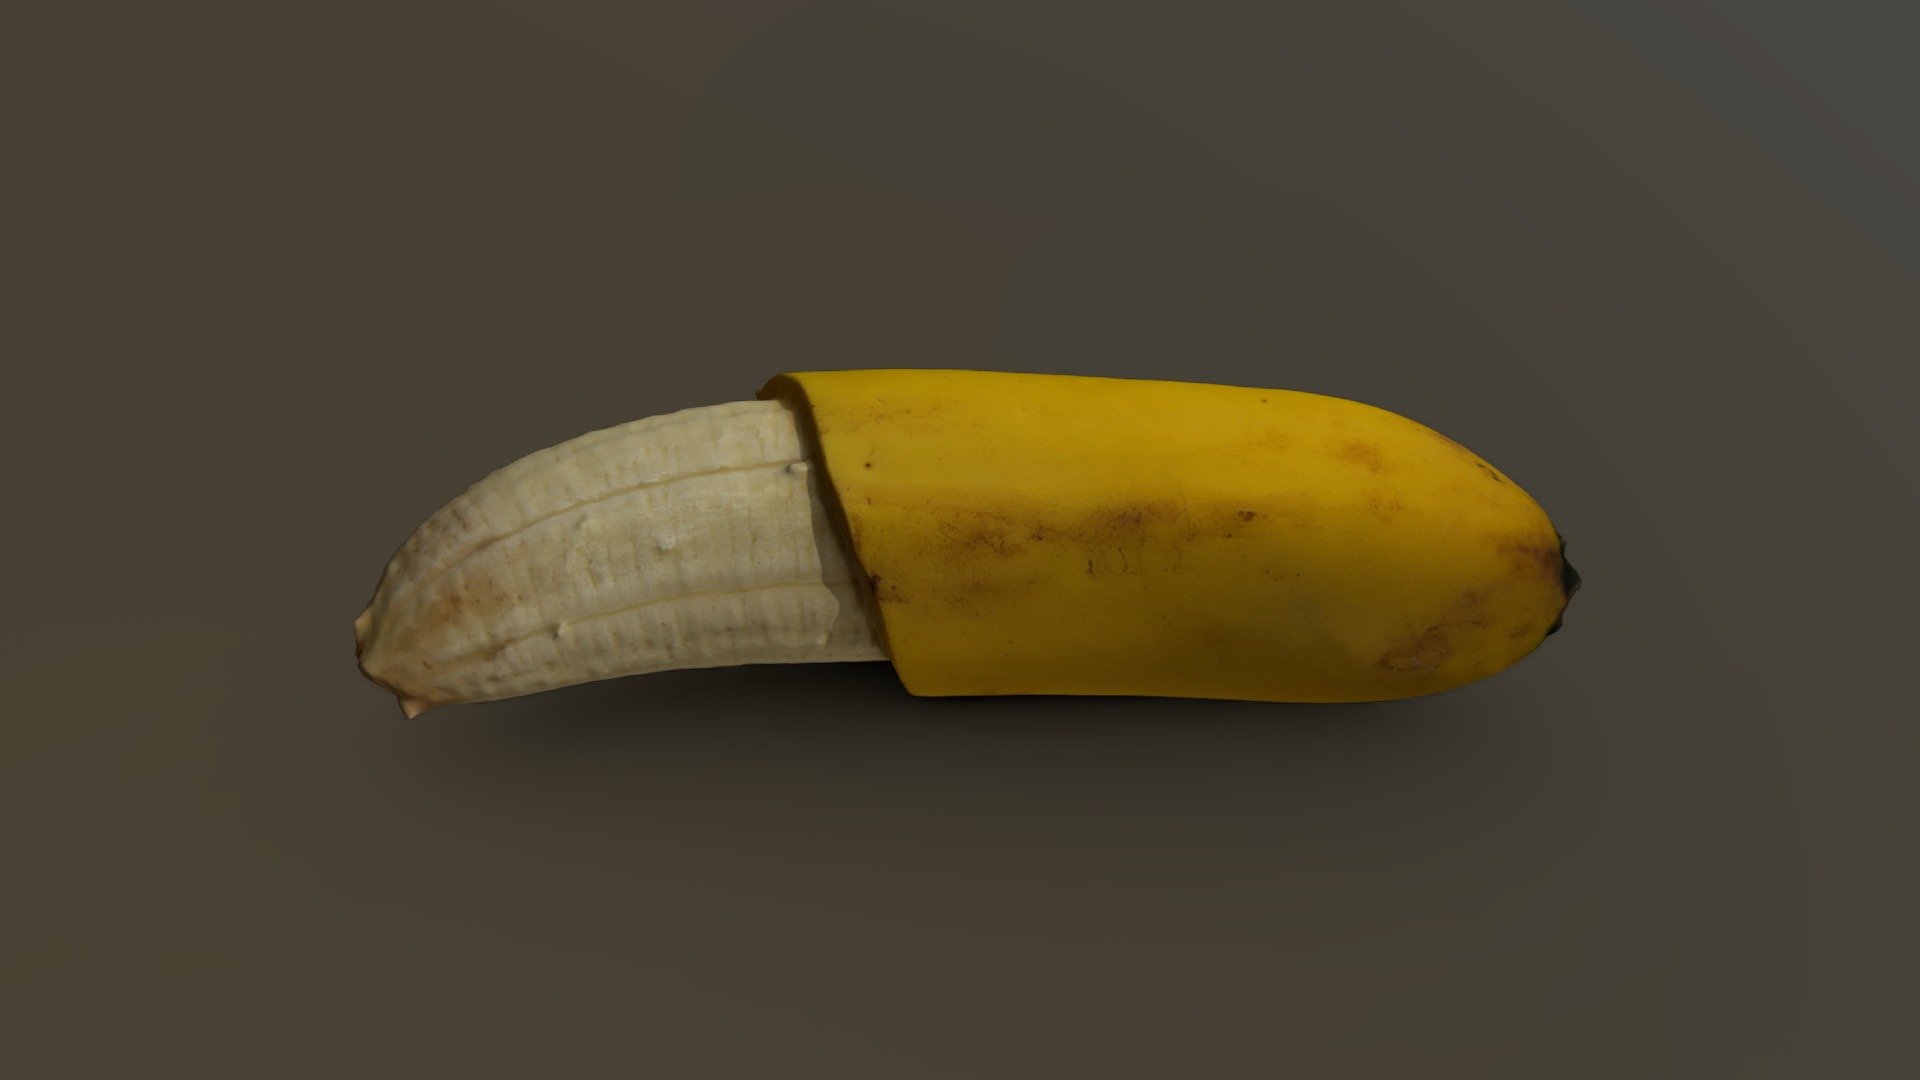 3D model Partially Peeled Banana 01 - This is a 3D model of the Partially Peeled Banana 01. The 3D model is about a banana on a white background.